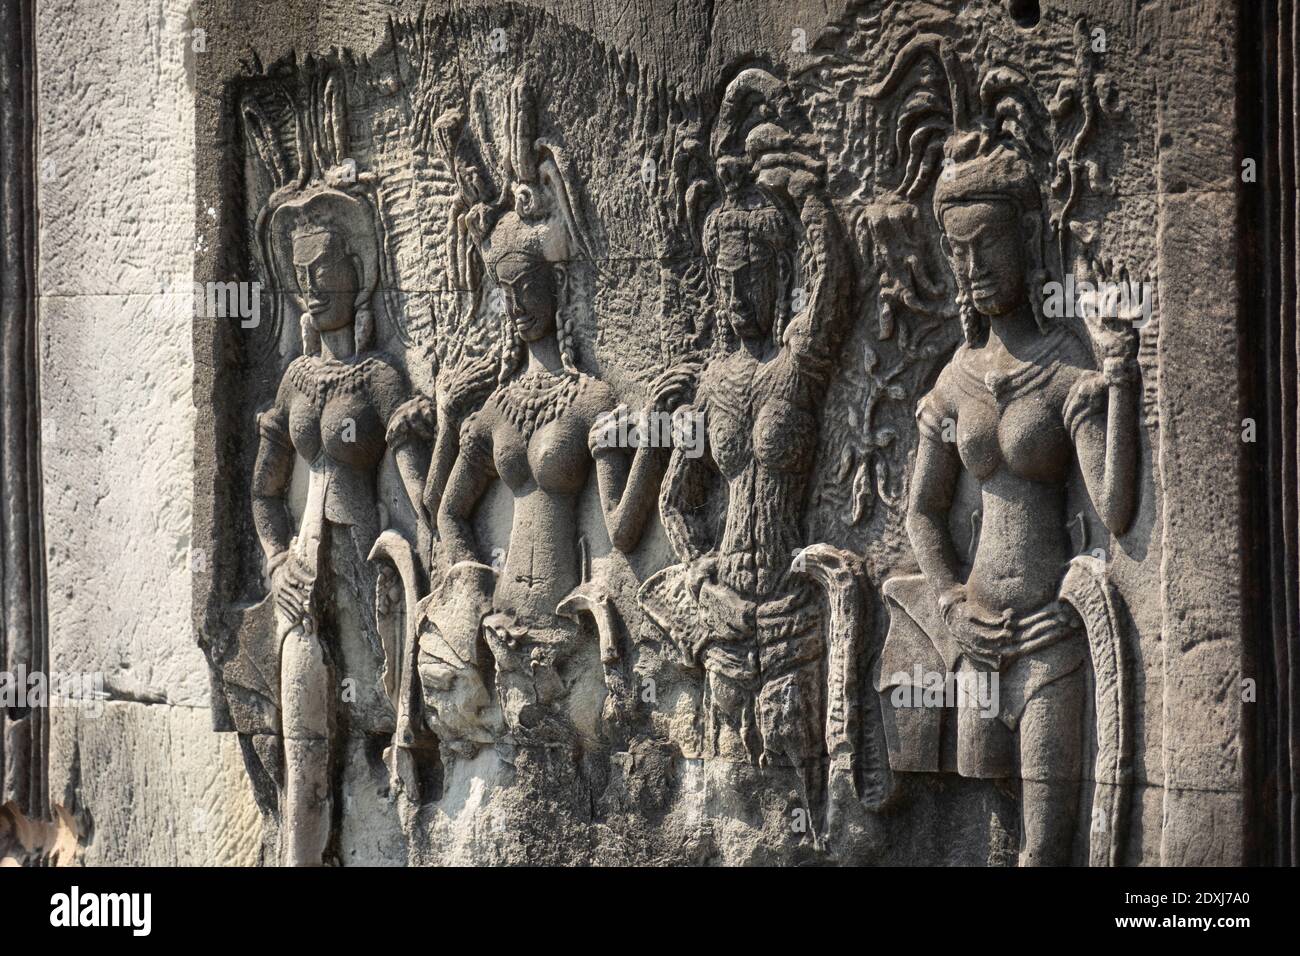 Bas-relief of female figures on the exterior walls of Angkor Wat Stock Photo